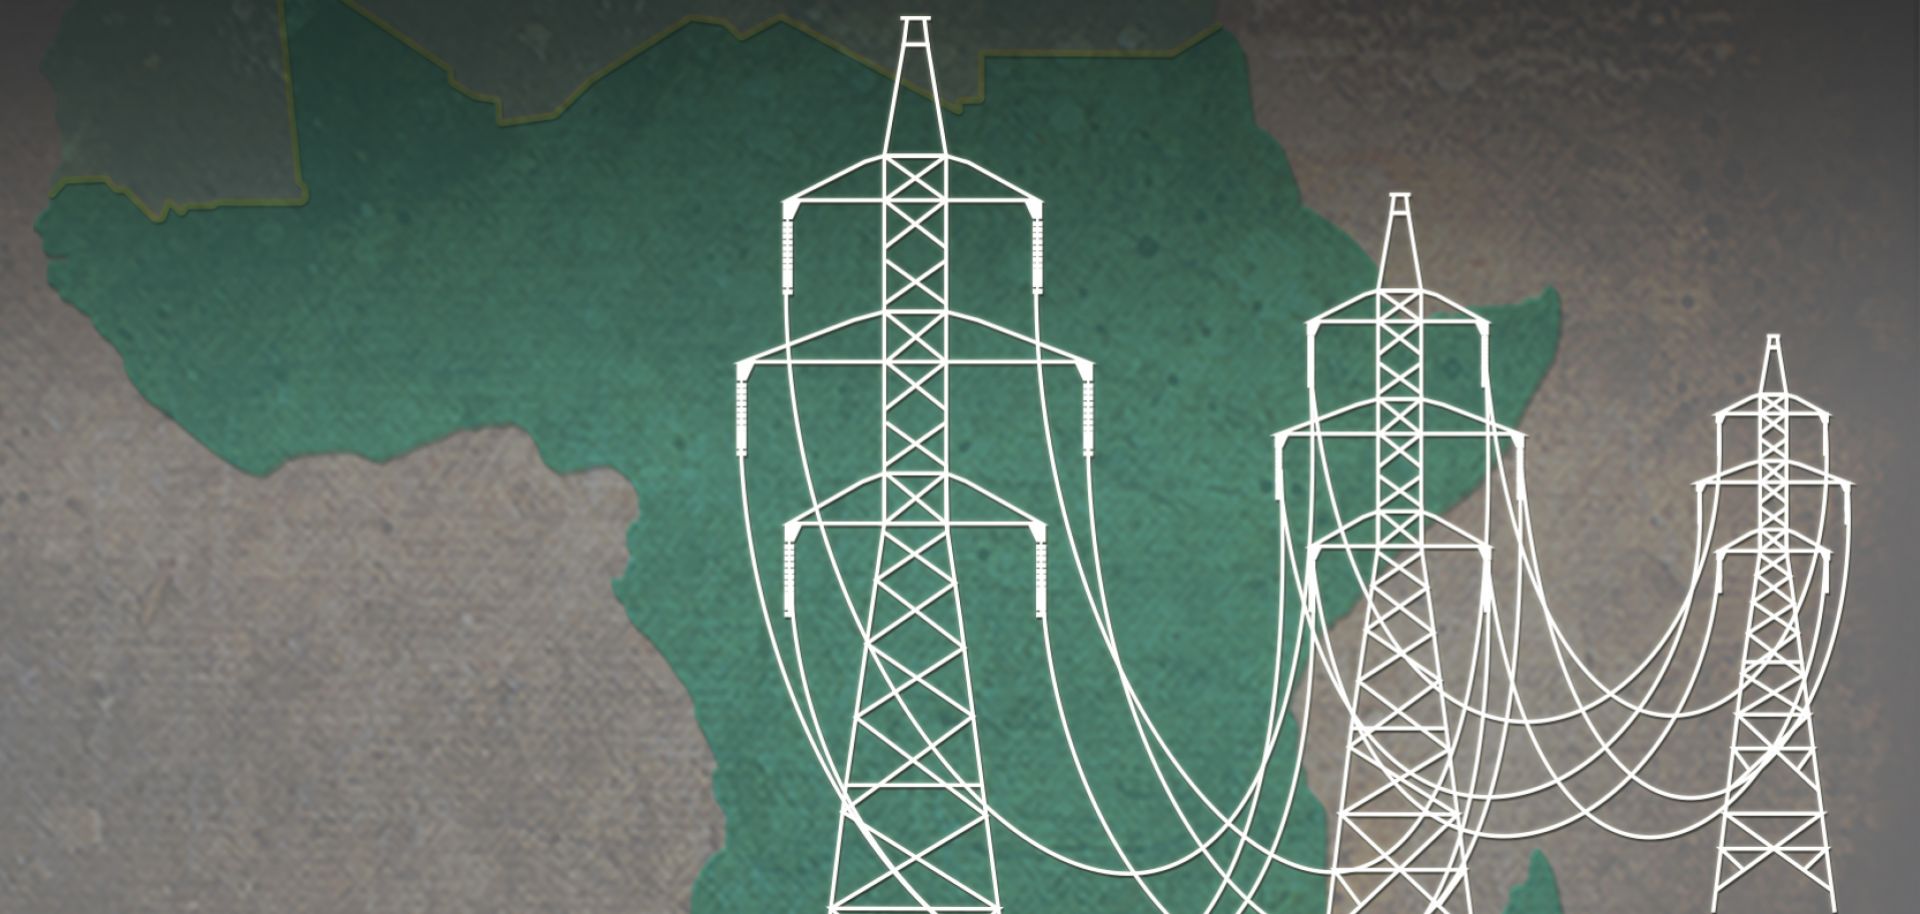 The East African electricity transmission network is perhaps the most fragmented in all of sub-Saharan Africa. The lack of connections between Sudan and Ethiopia, and between Ethiopia and Kenya, leaves significant gaps among the main electricity producers in the Eastern Africa Power Pool. Kenya, Tanzania and Uganda currently conduct most of the power trading in East Africa.